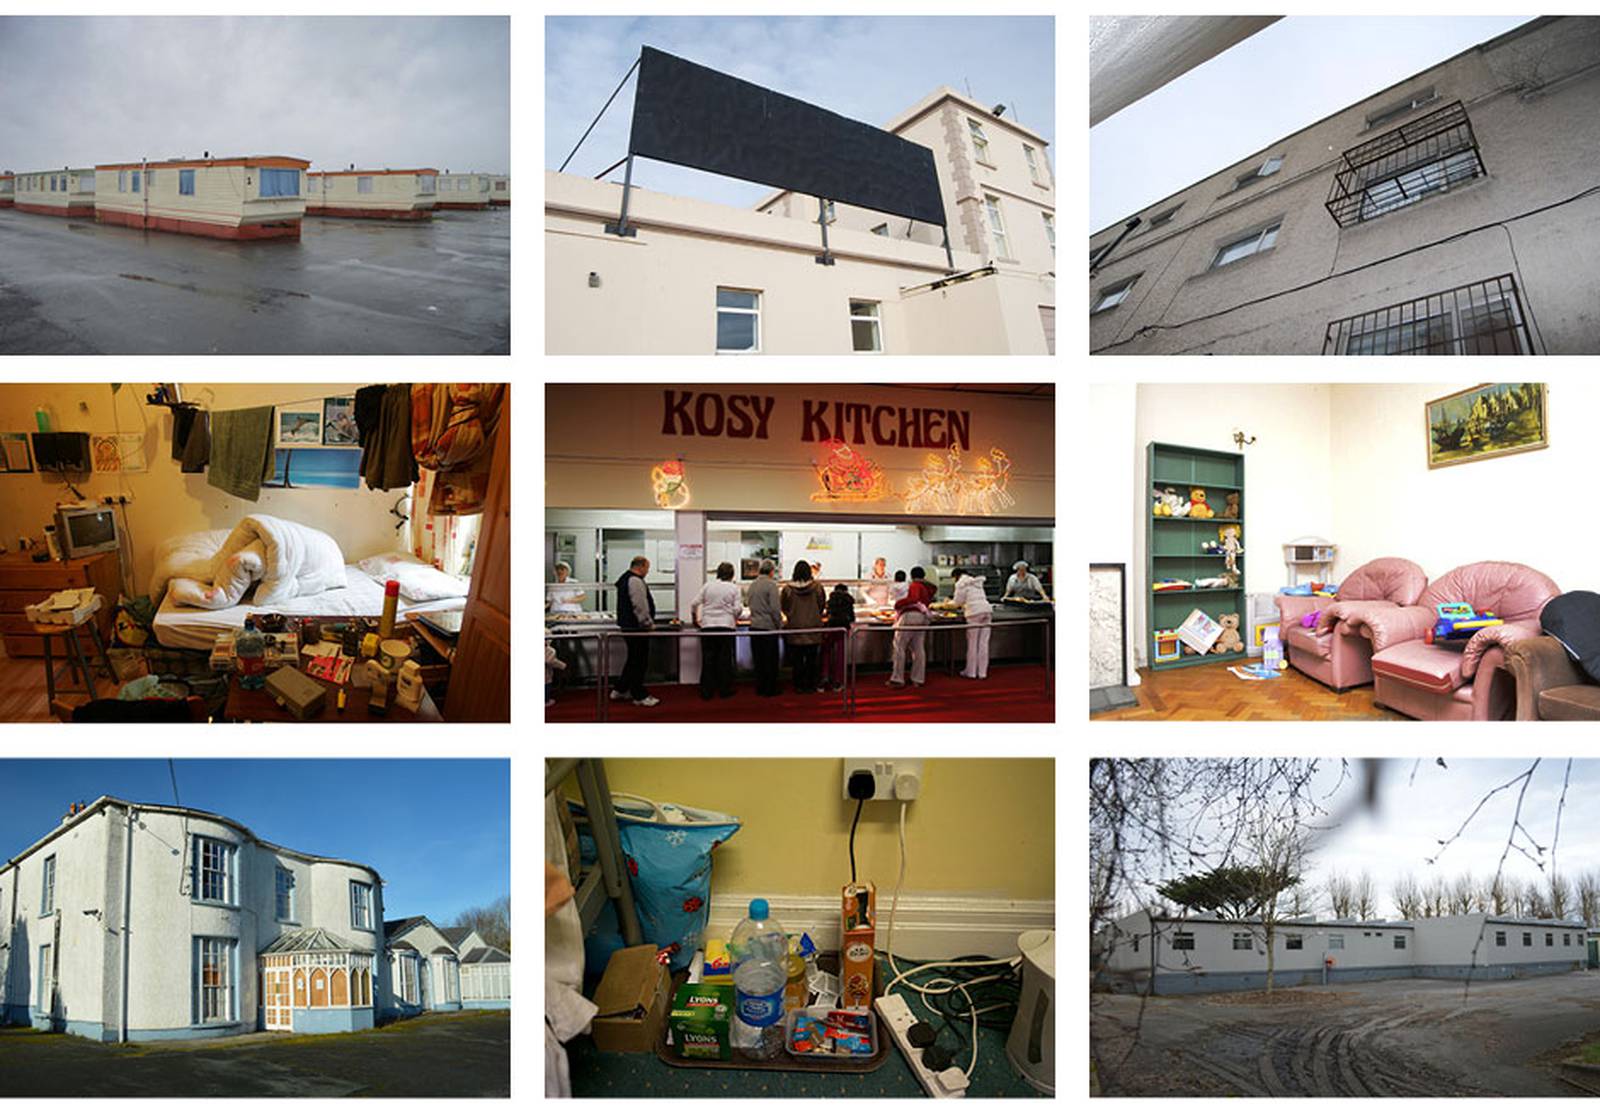 Images taken by asylum seekers of their living conditions in the direct provision system.